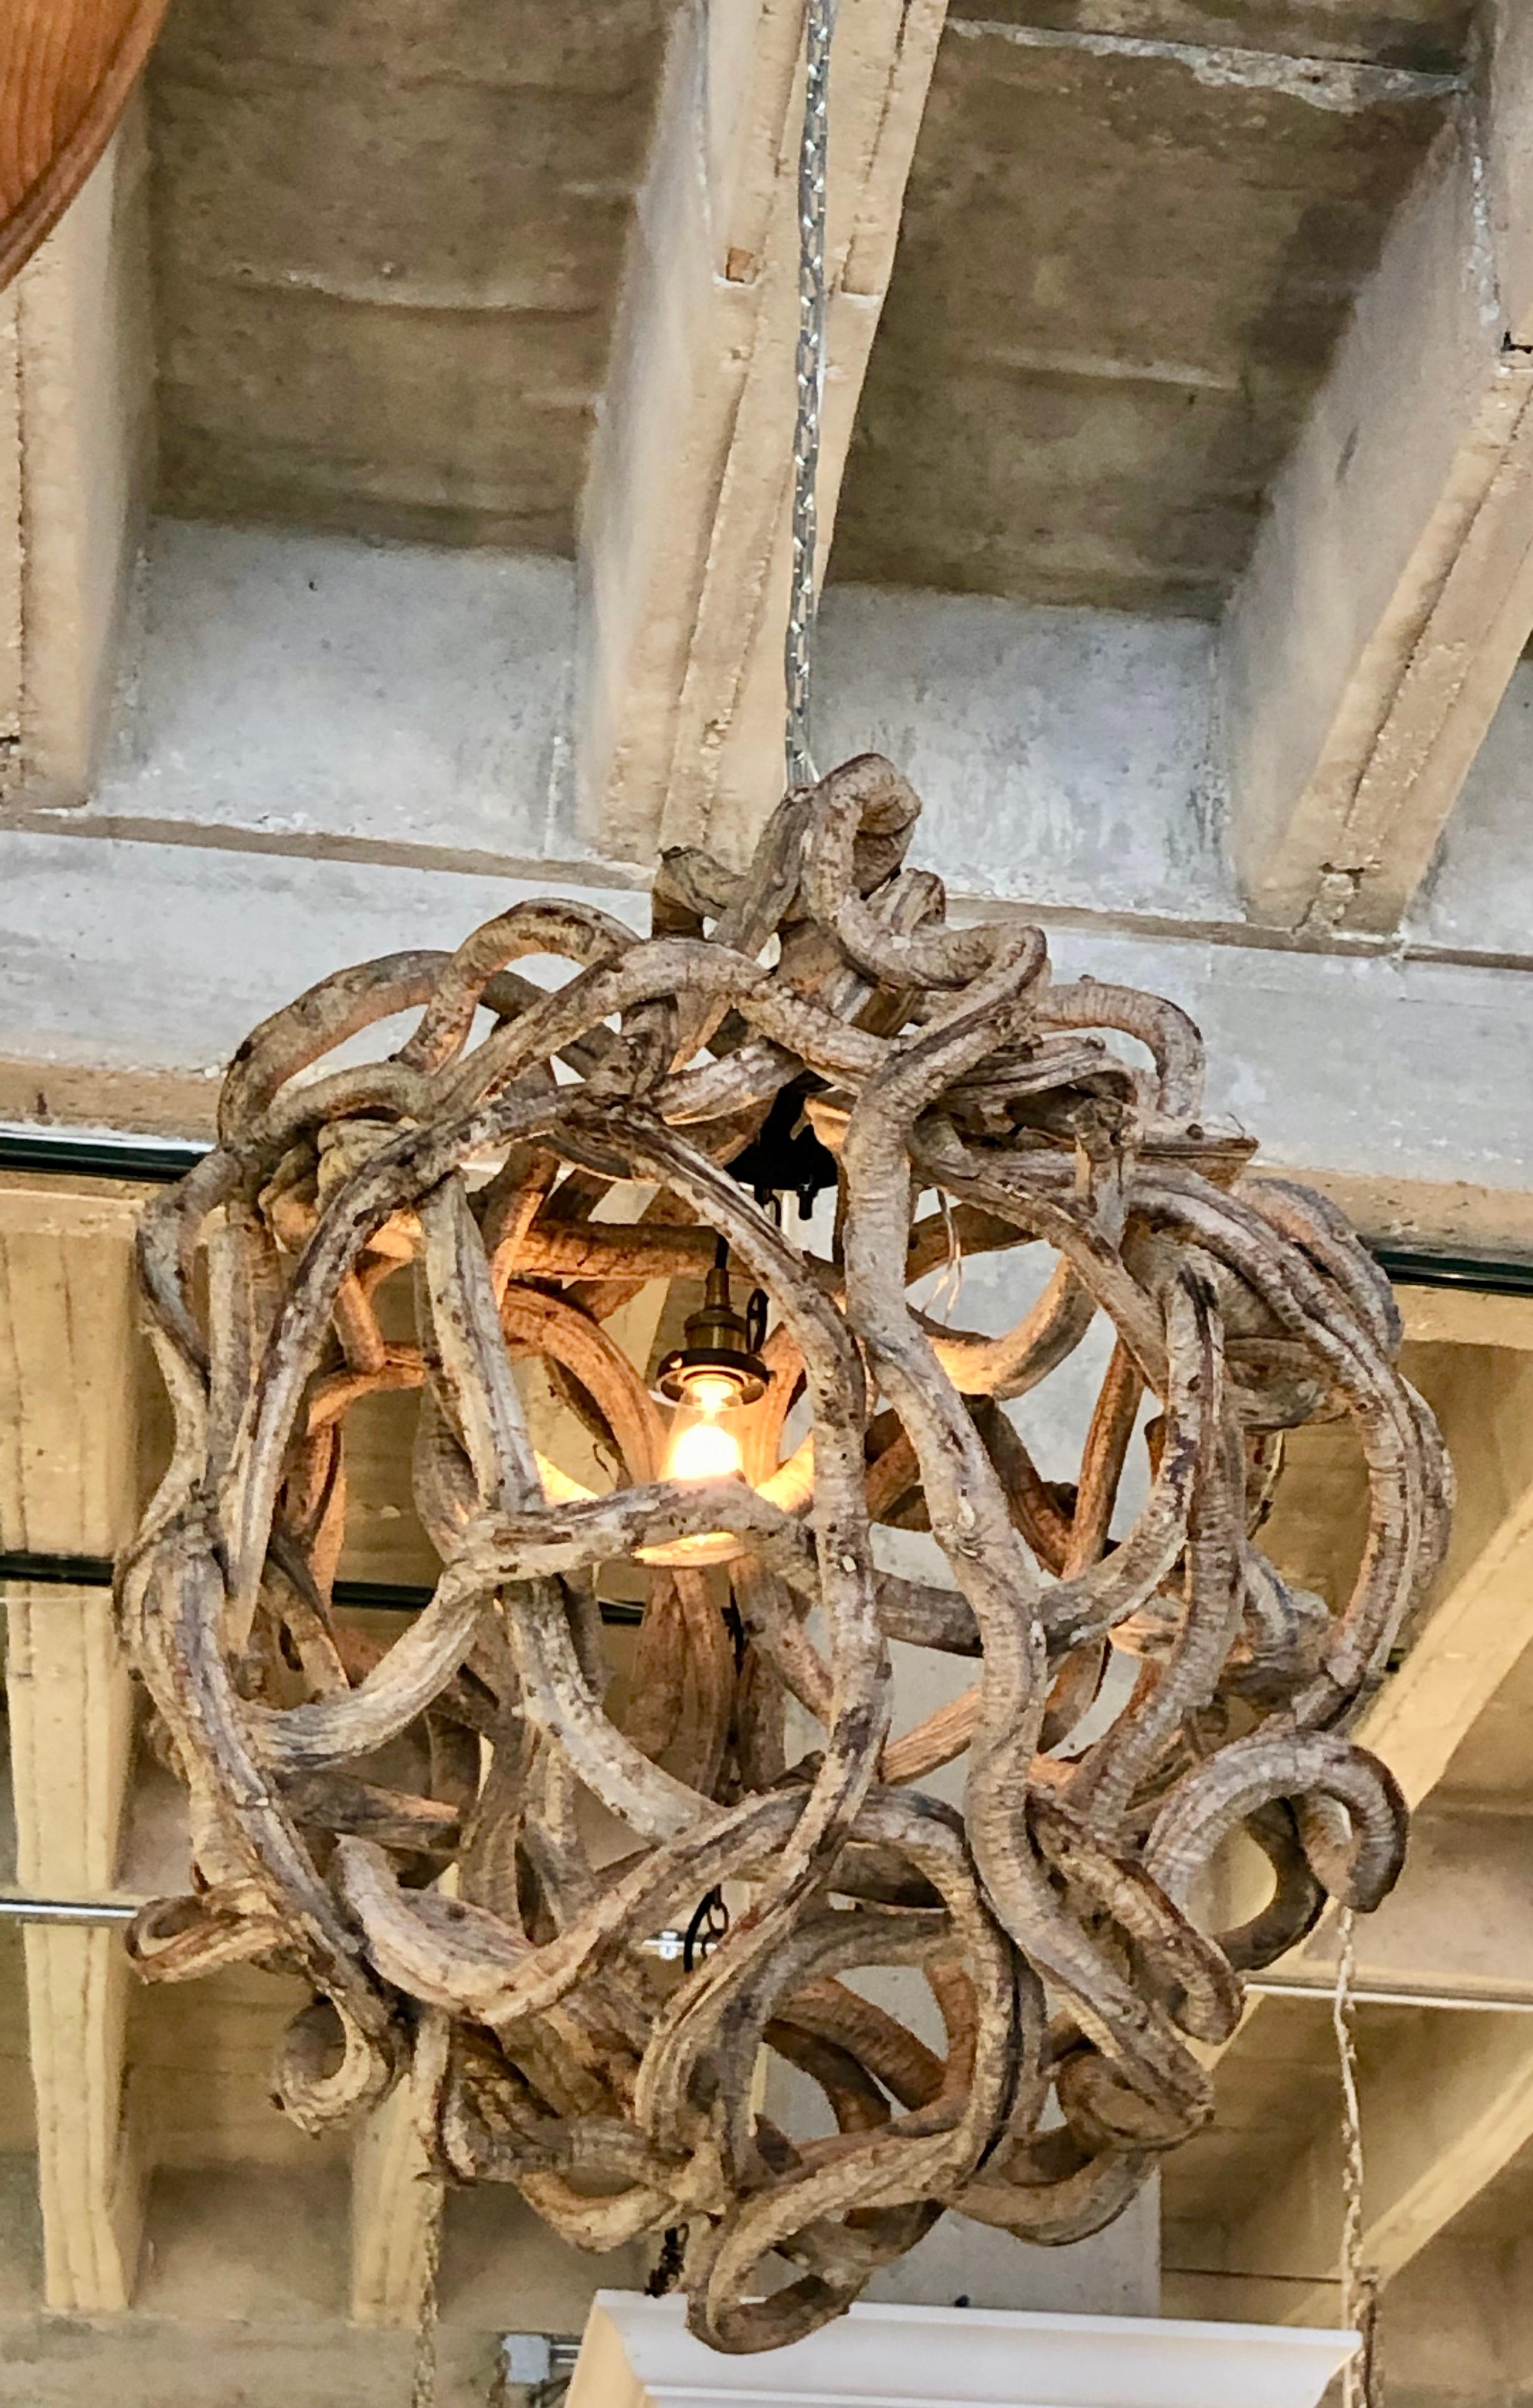 Extra large root ball chandelier recently fitted.